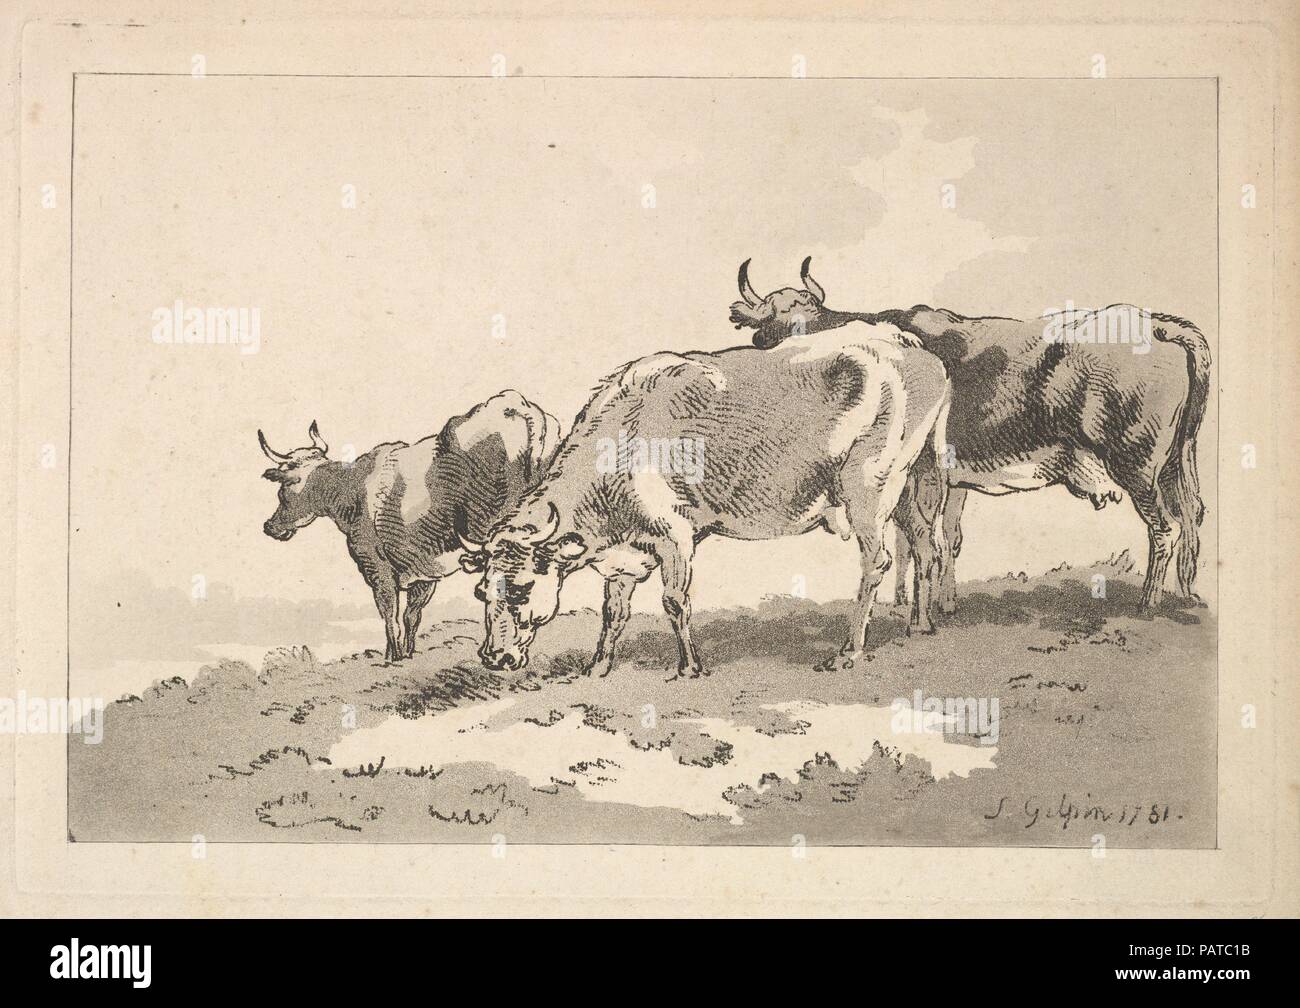 Three Cows Standing on the Ridge of a Field. Artist: After Sawrey Gilpin (British, near Carlisle 1733-1807 Scaleby, Cumbria). Dimensions: Plate: 7 5/8 x 11 in. (19.4 x 28 cm)  Sheet: 18 1/2 x 12 3/8 in. (47 x 31.5 cm). Etcher: Thomas Rowlandson (British, London 1757-1827 London). Published in: London. Series/Portfolio: Imitations of Modern Drawings. Date: 1781. Museum: Metropolitan Museum of Art, New York, USA. Stock Photo